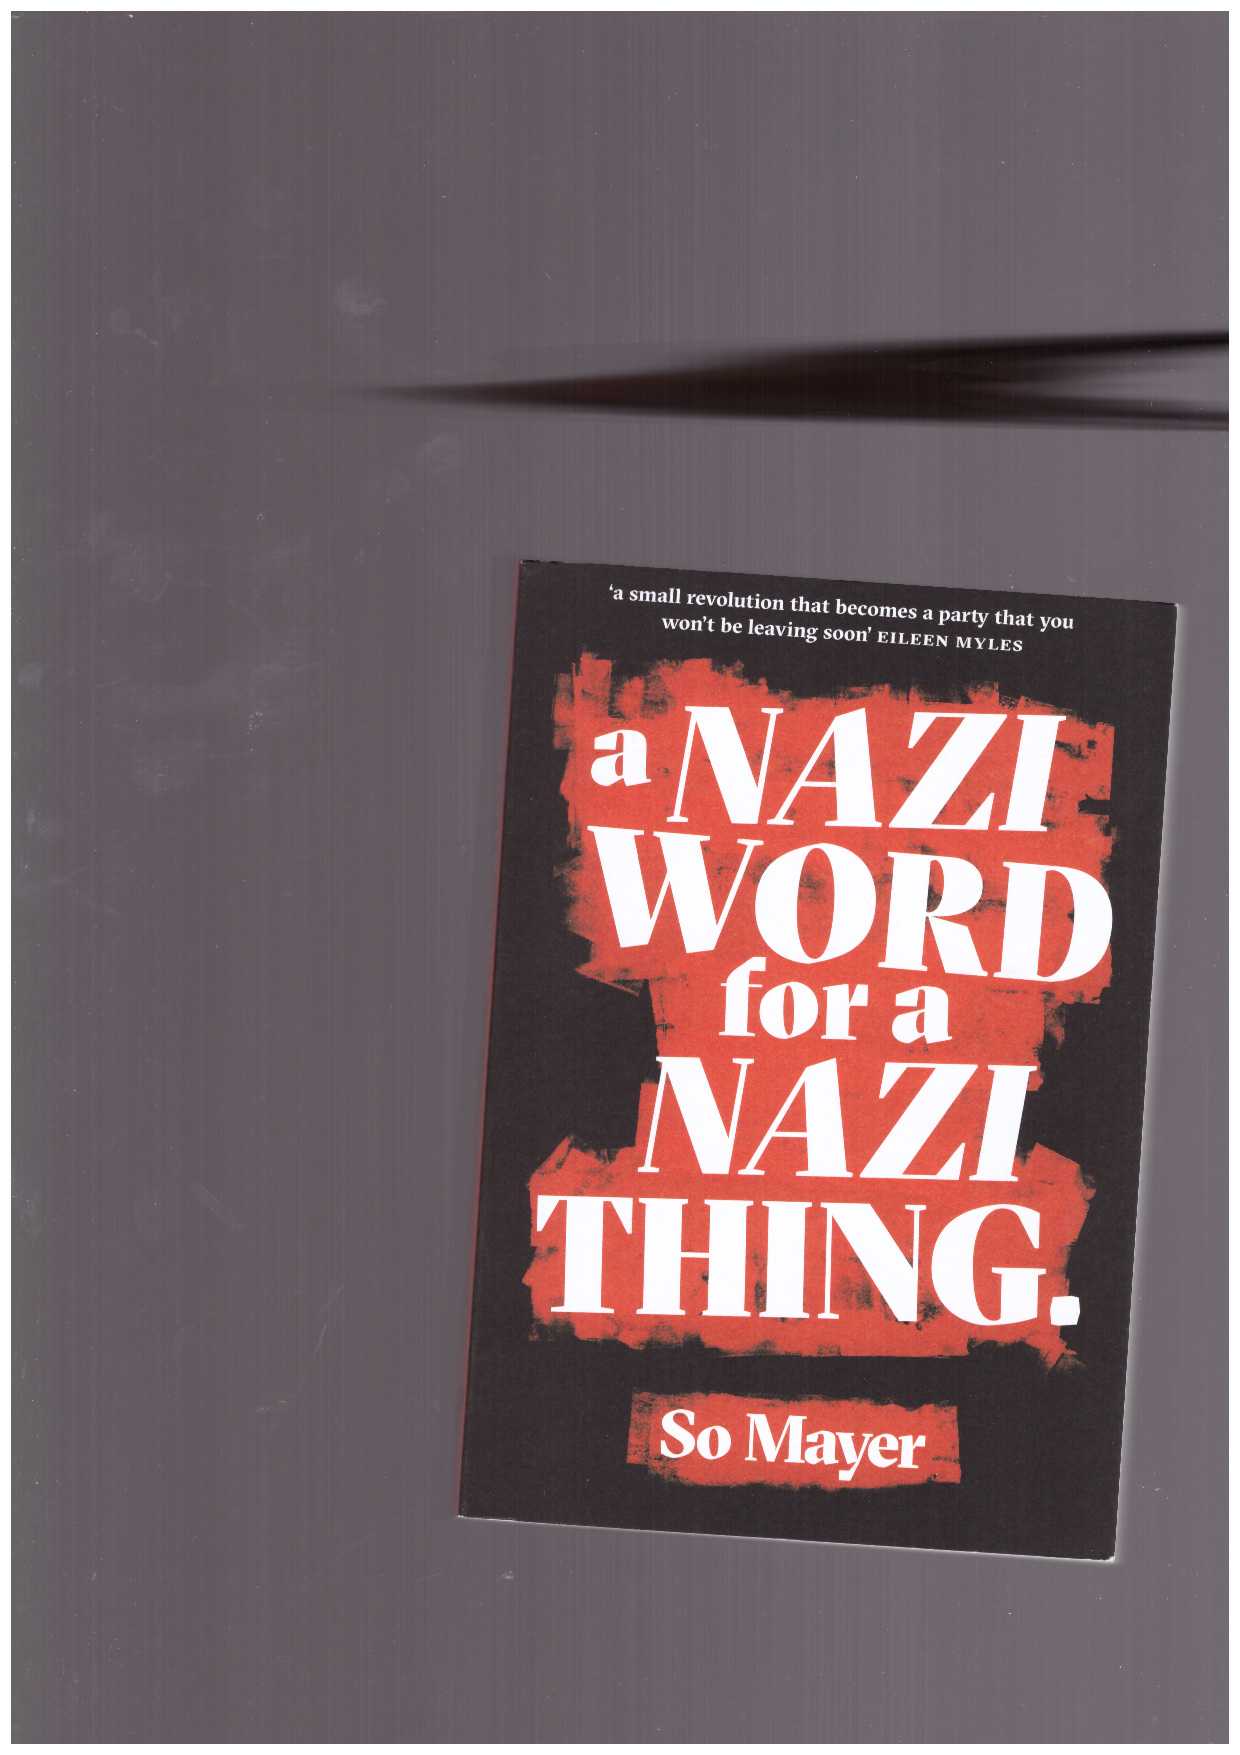 MAYER, So - A Nazi Word for a Nazi Thing